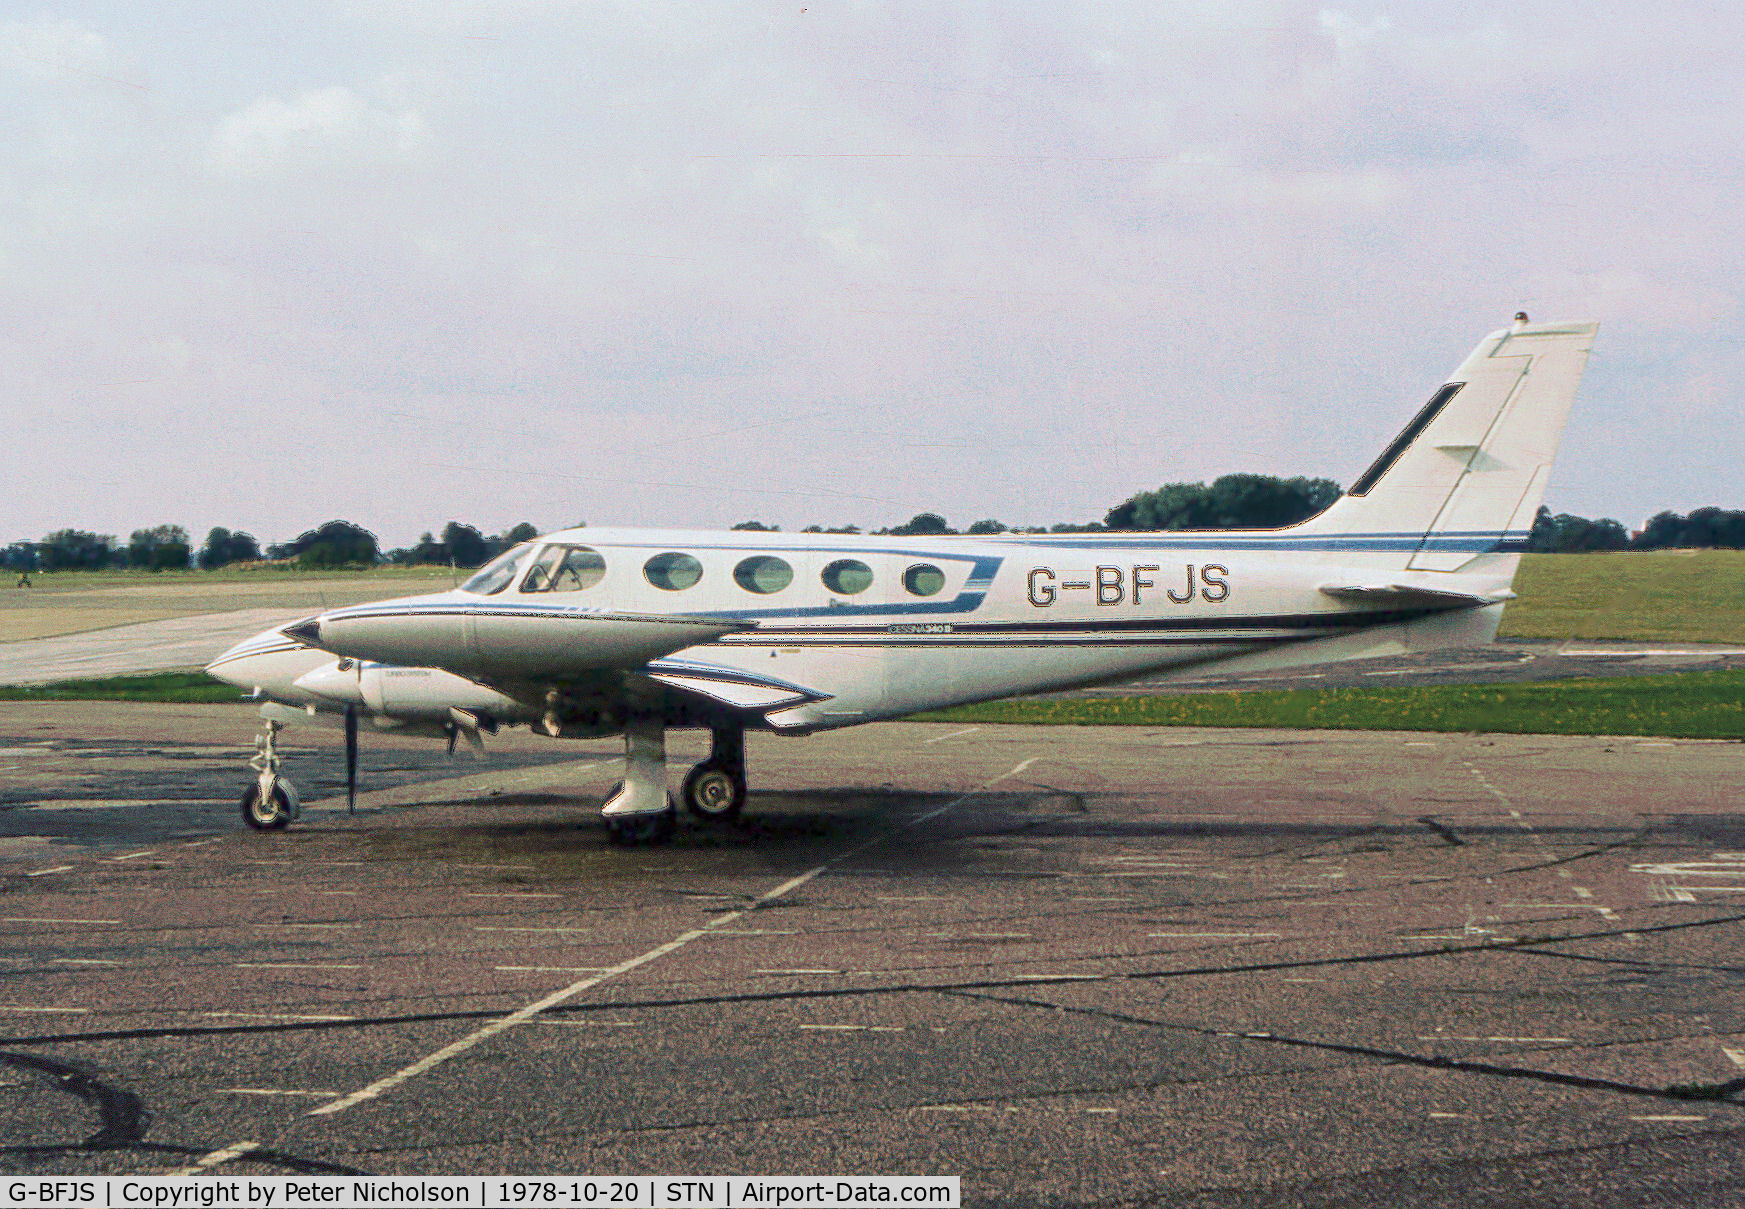 G-BFJS, 1978 Cessna 340 C/N 340-0442, Cessna 340A as seen at Stansted in October 1978.